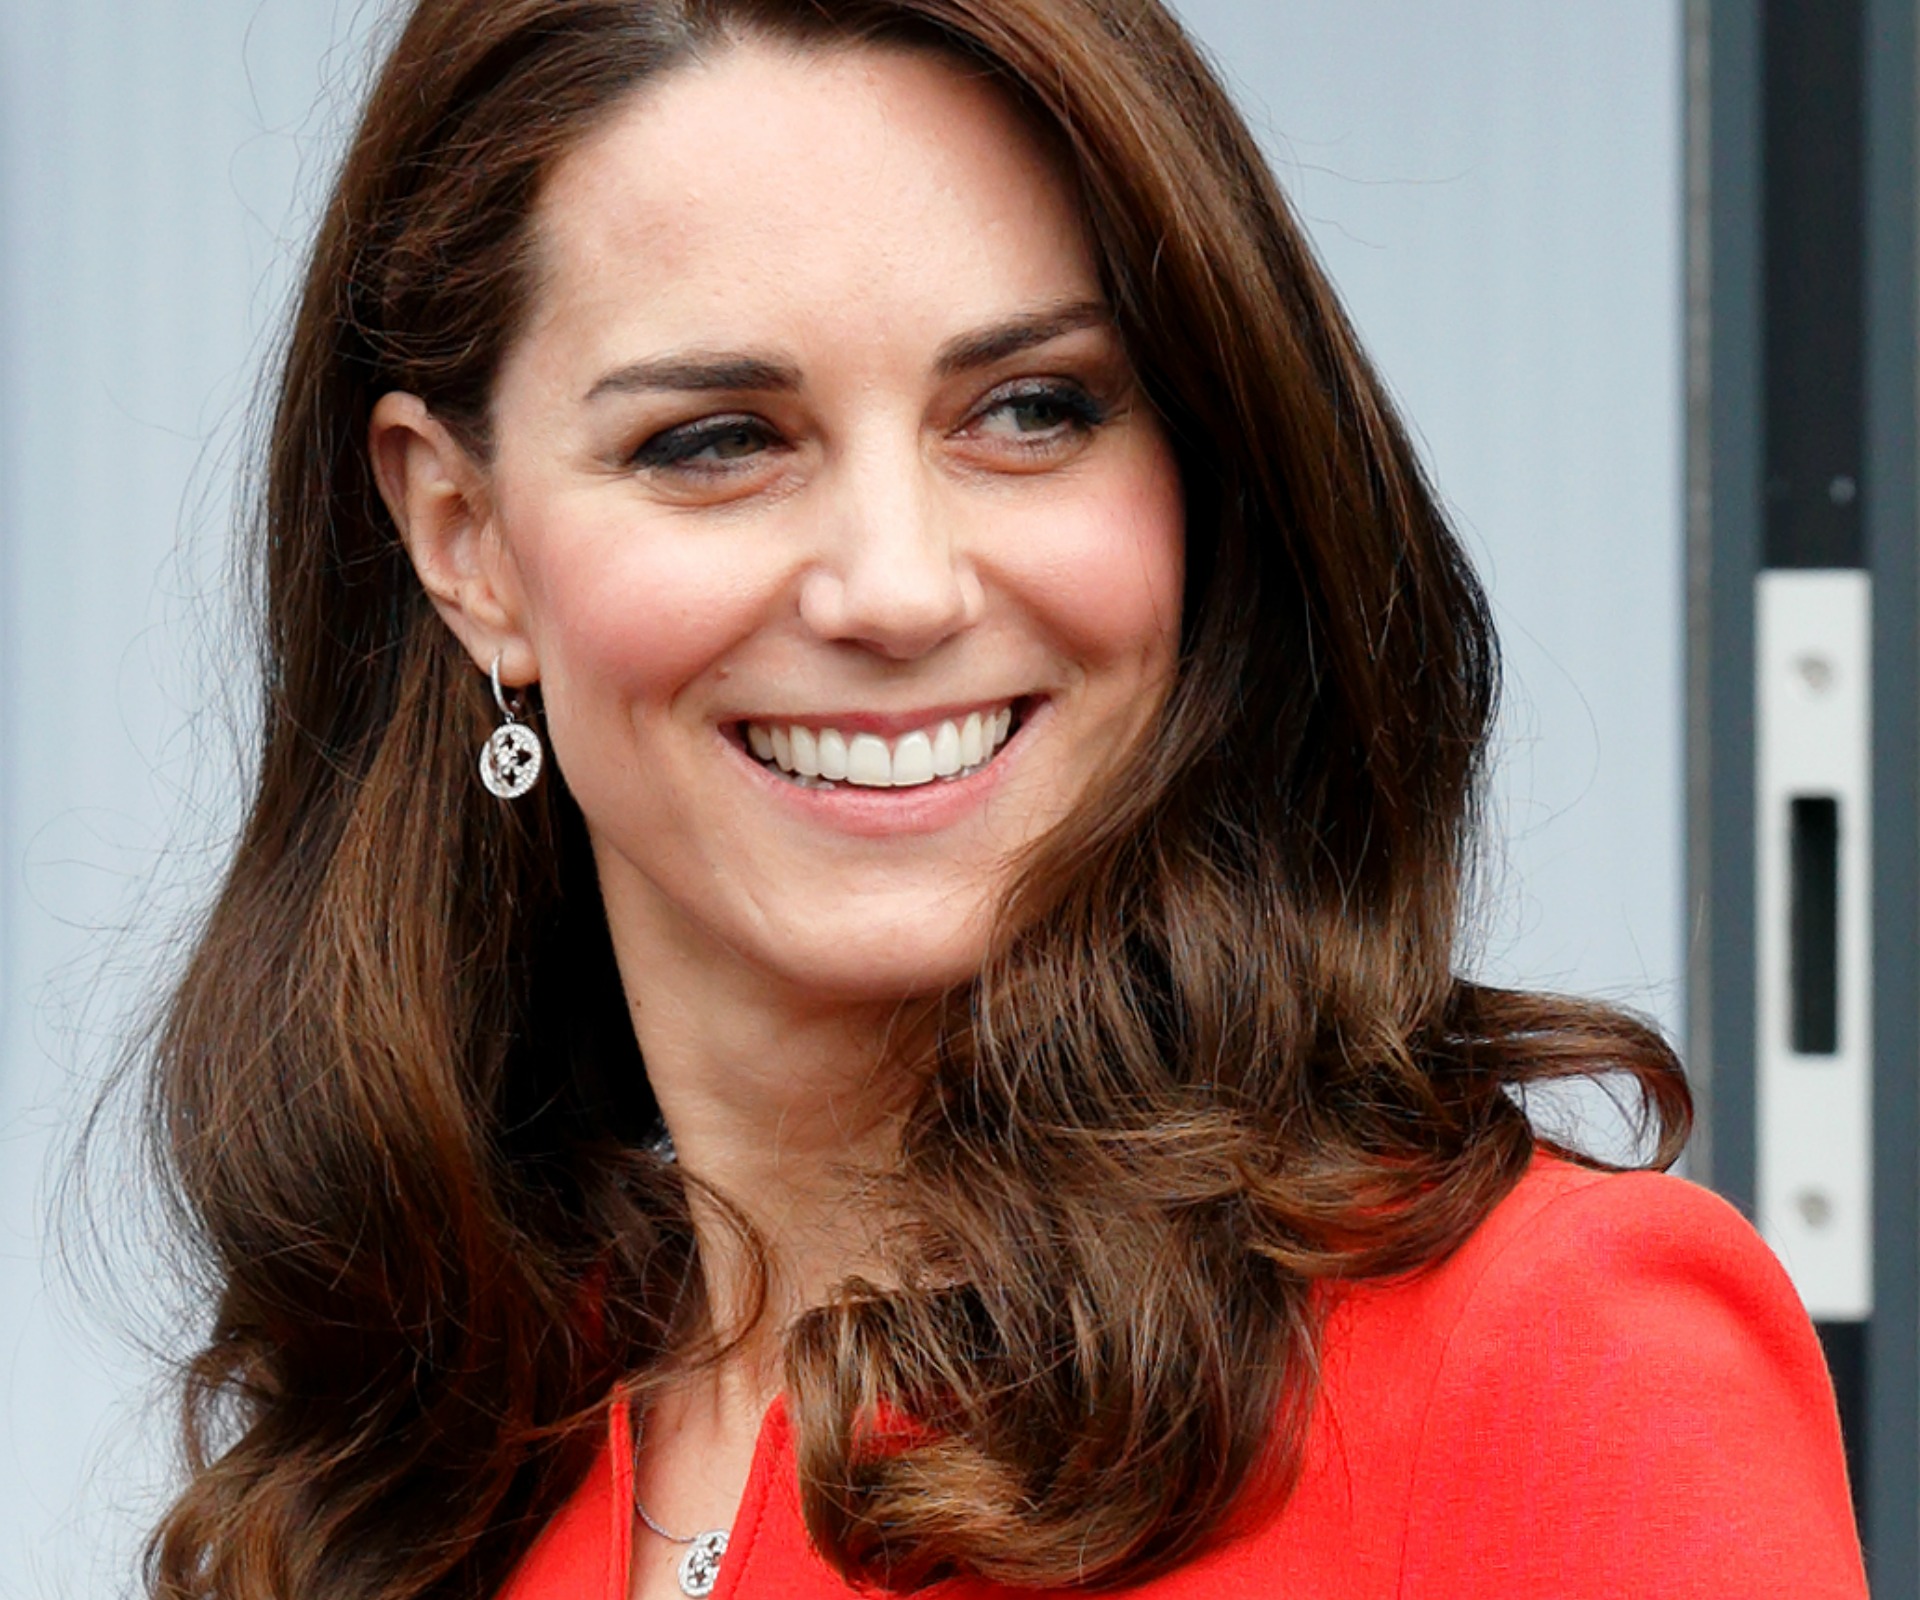 The Duchess of Cambridge opens up about the realities of motherhood